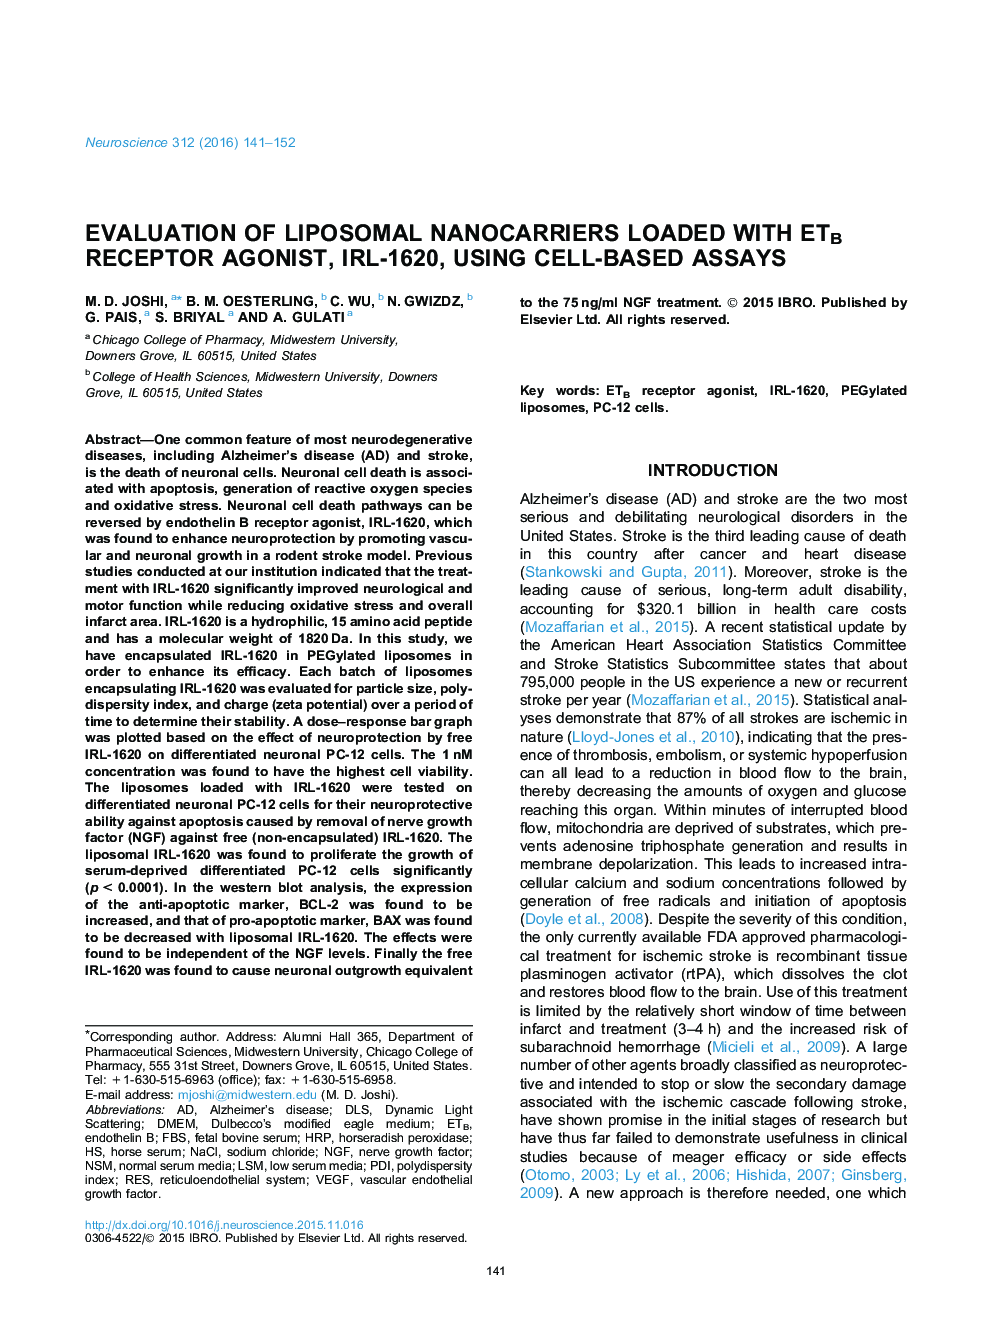 Evaluation of liposomal nanocarriers loaded with ETB receptor agonist, IRL-1620, using cell-based assays